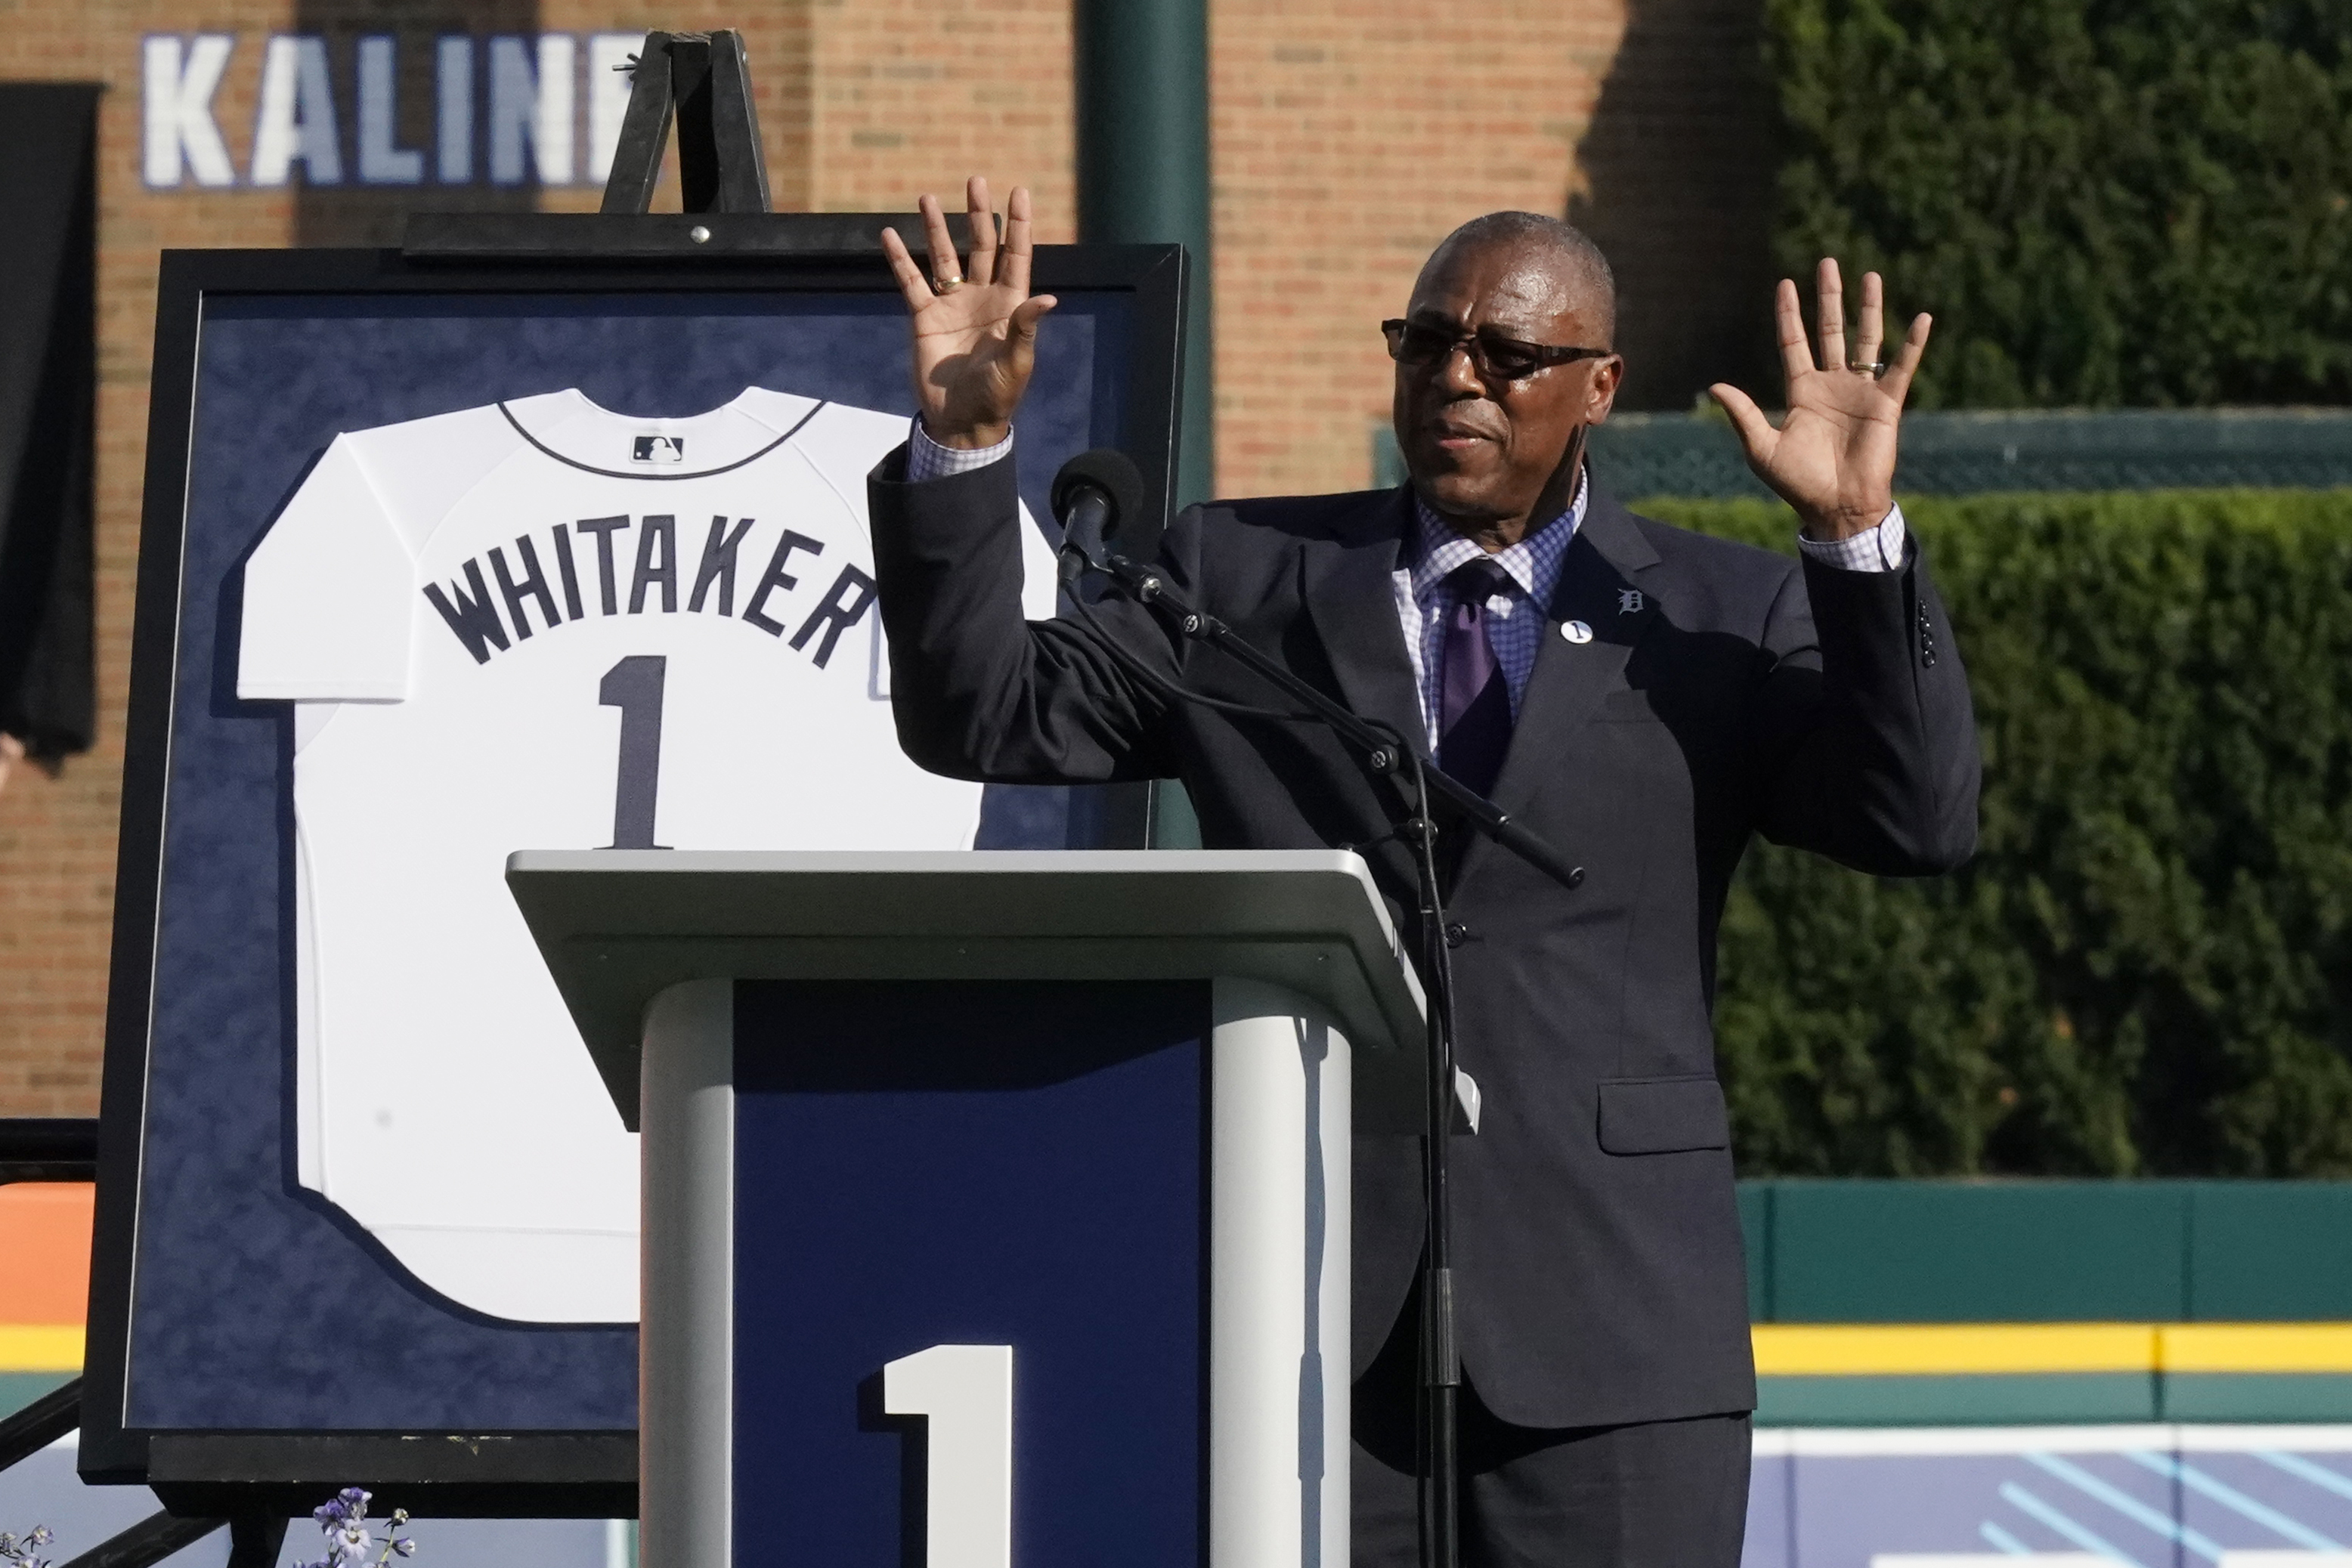 Lou Whitaker's No. 1 joining Tigers' retired jersey numbers